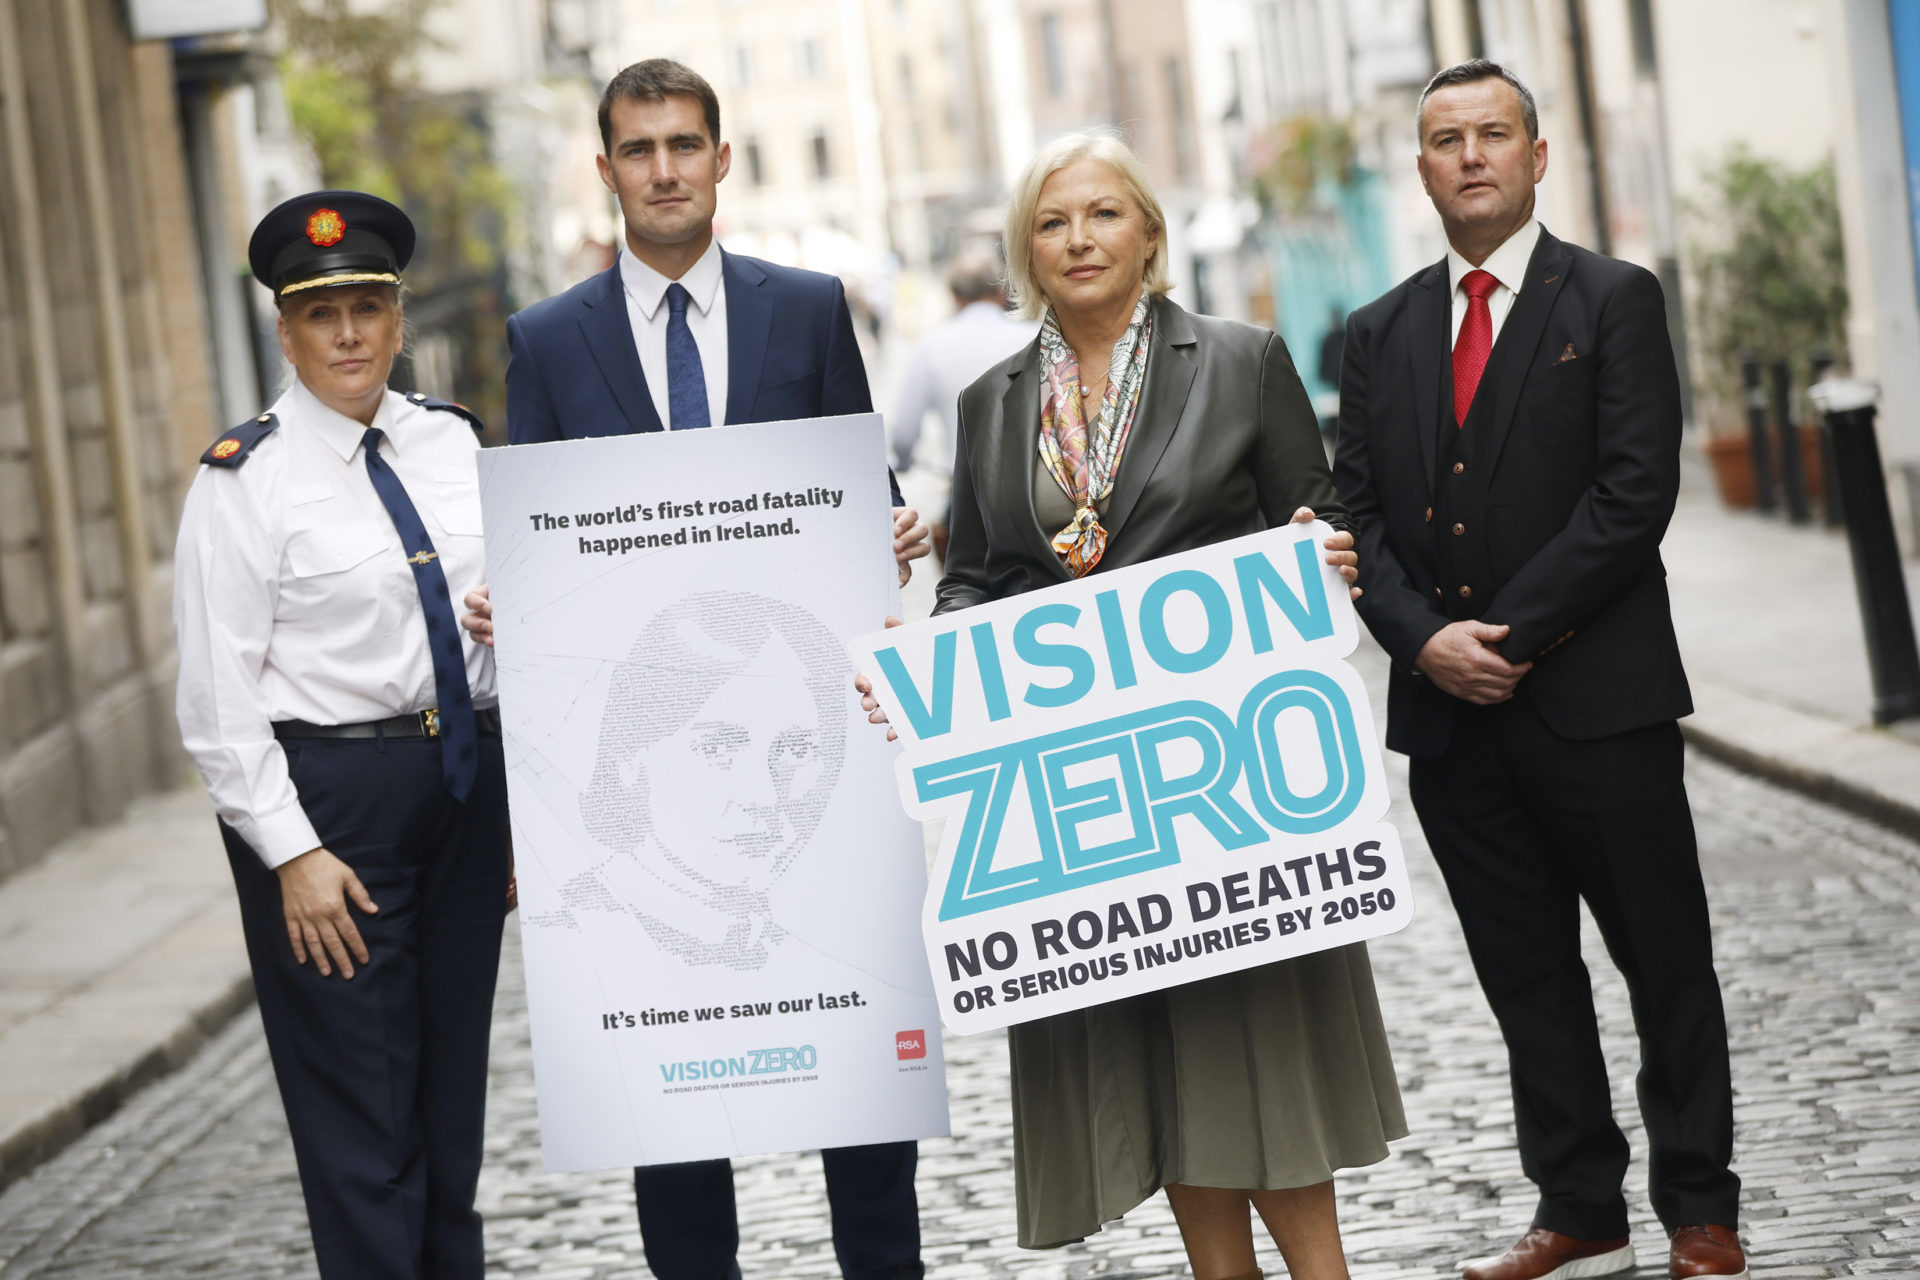 Assistant Garda Commissioner Paula Hillman, Minister of State at the Department of Transport Jack Chambers, RSA chairperson Liz O'Donnell and RSA CEO Sam Waide at the launch of the 'Vision Zero' in Dublin city centre